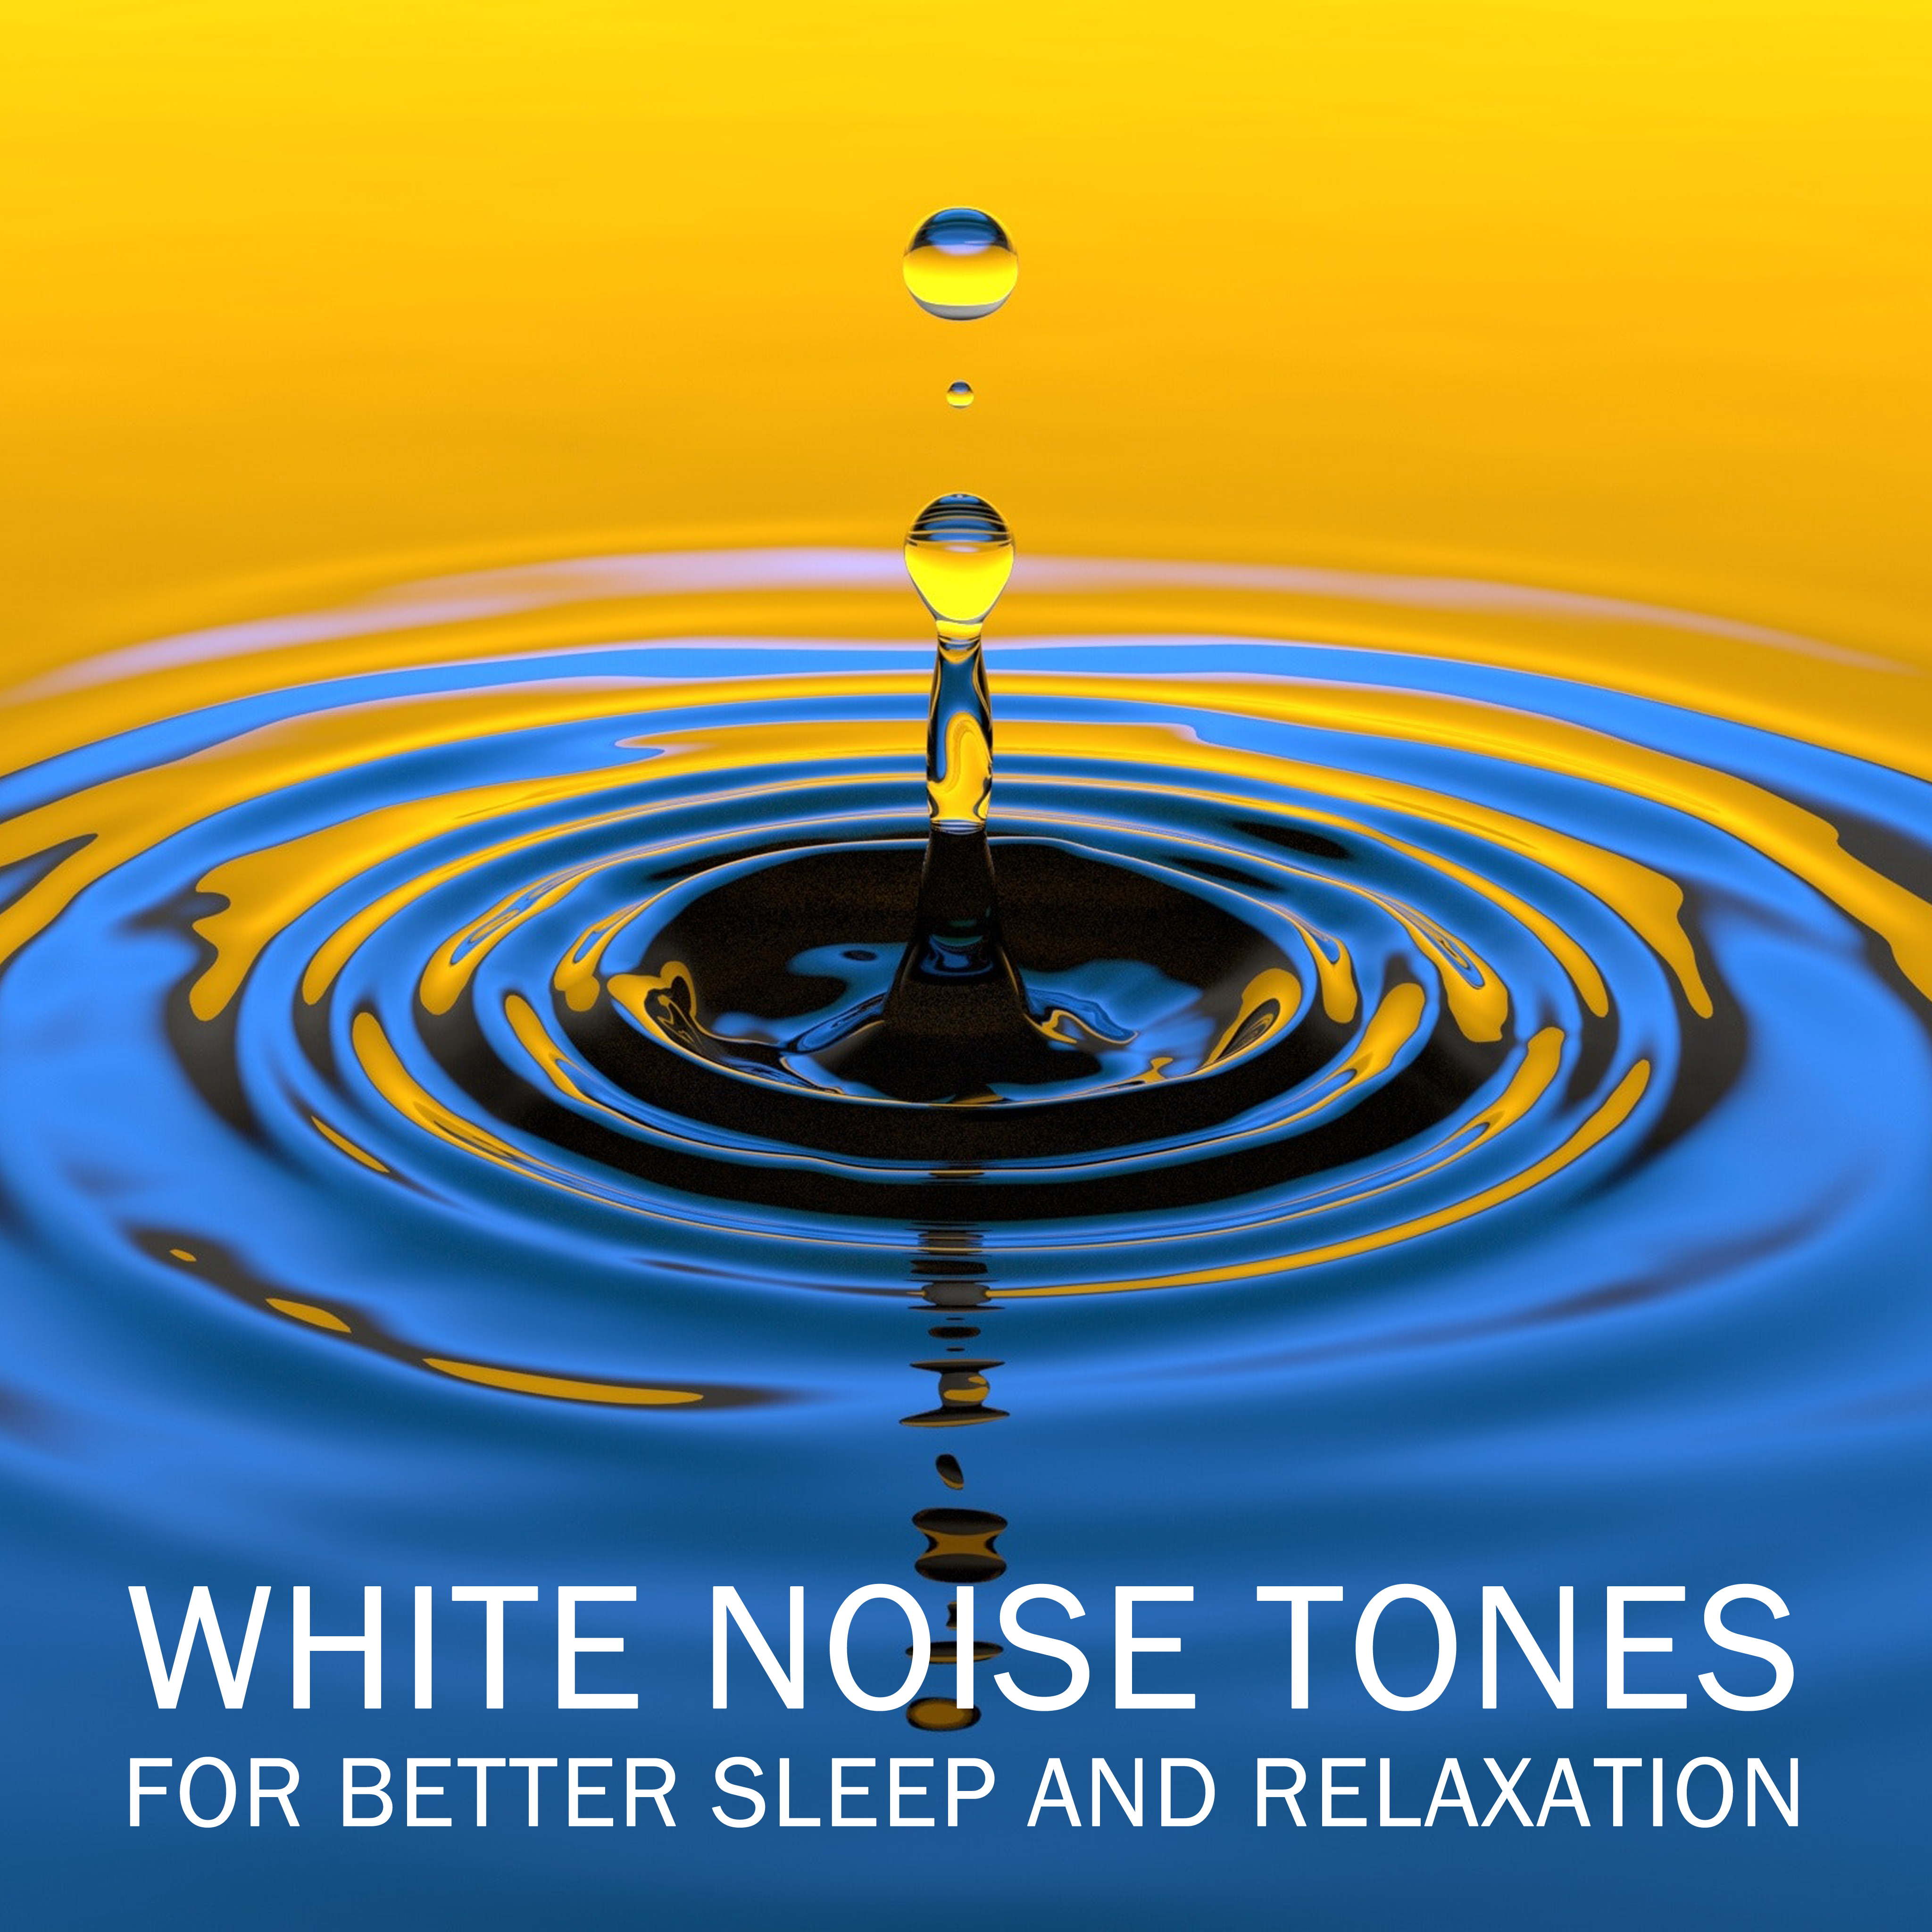 11 White Noise Tones for Better Sleep and Relaxation